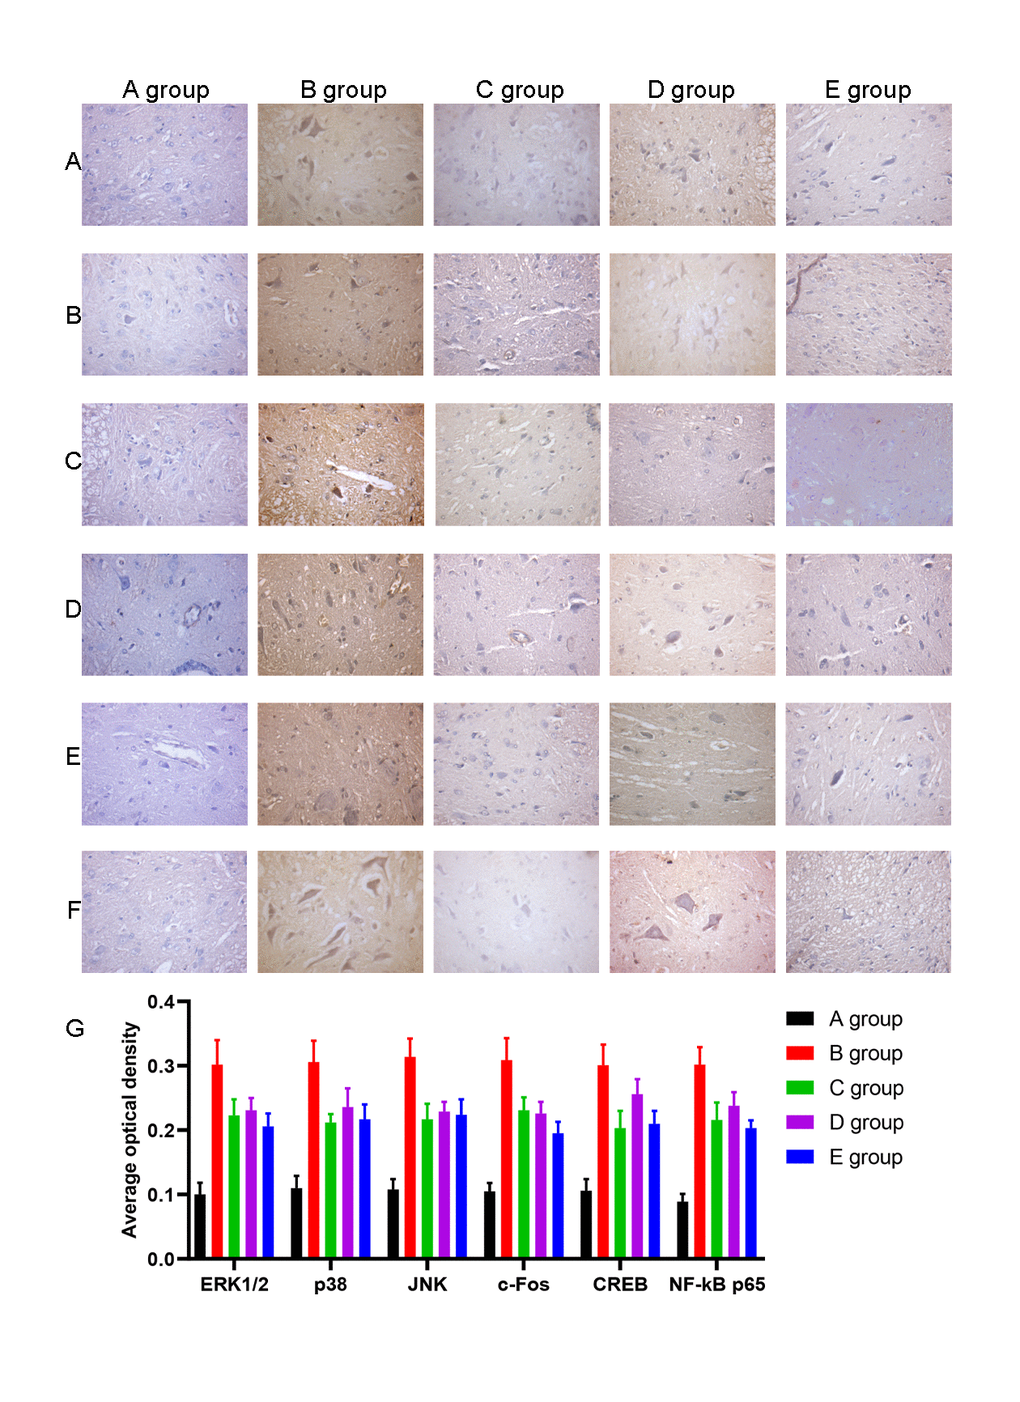 The effect of Huangqi Guizhi Wuwu Decoction on the expression of ERK1/2, p38, JNK, c-Fos, CREB and NF-kB in the L4-L5 dorsal root ganglions of different rat groups detected by IHC. (A–F) The typical pictures of ERK1/2, p38, JNK, c-Fos, CREB and NF-kB expression in the L4-L5 dorsal root ganglions of different rat groups detected by IHC. (G) The average optical density of ERK1/2, p38, JNK, c-Fos, CREB, and NF-kB expression in the L4-L5 dorsal root ganglions of different rat groups.